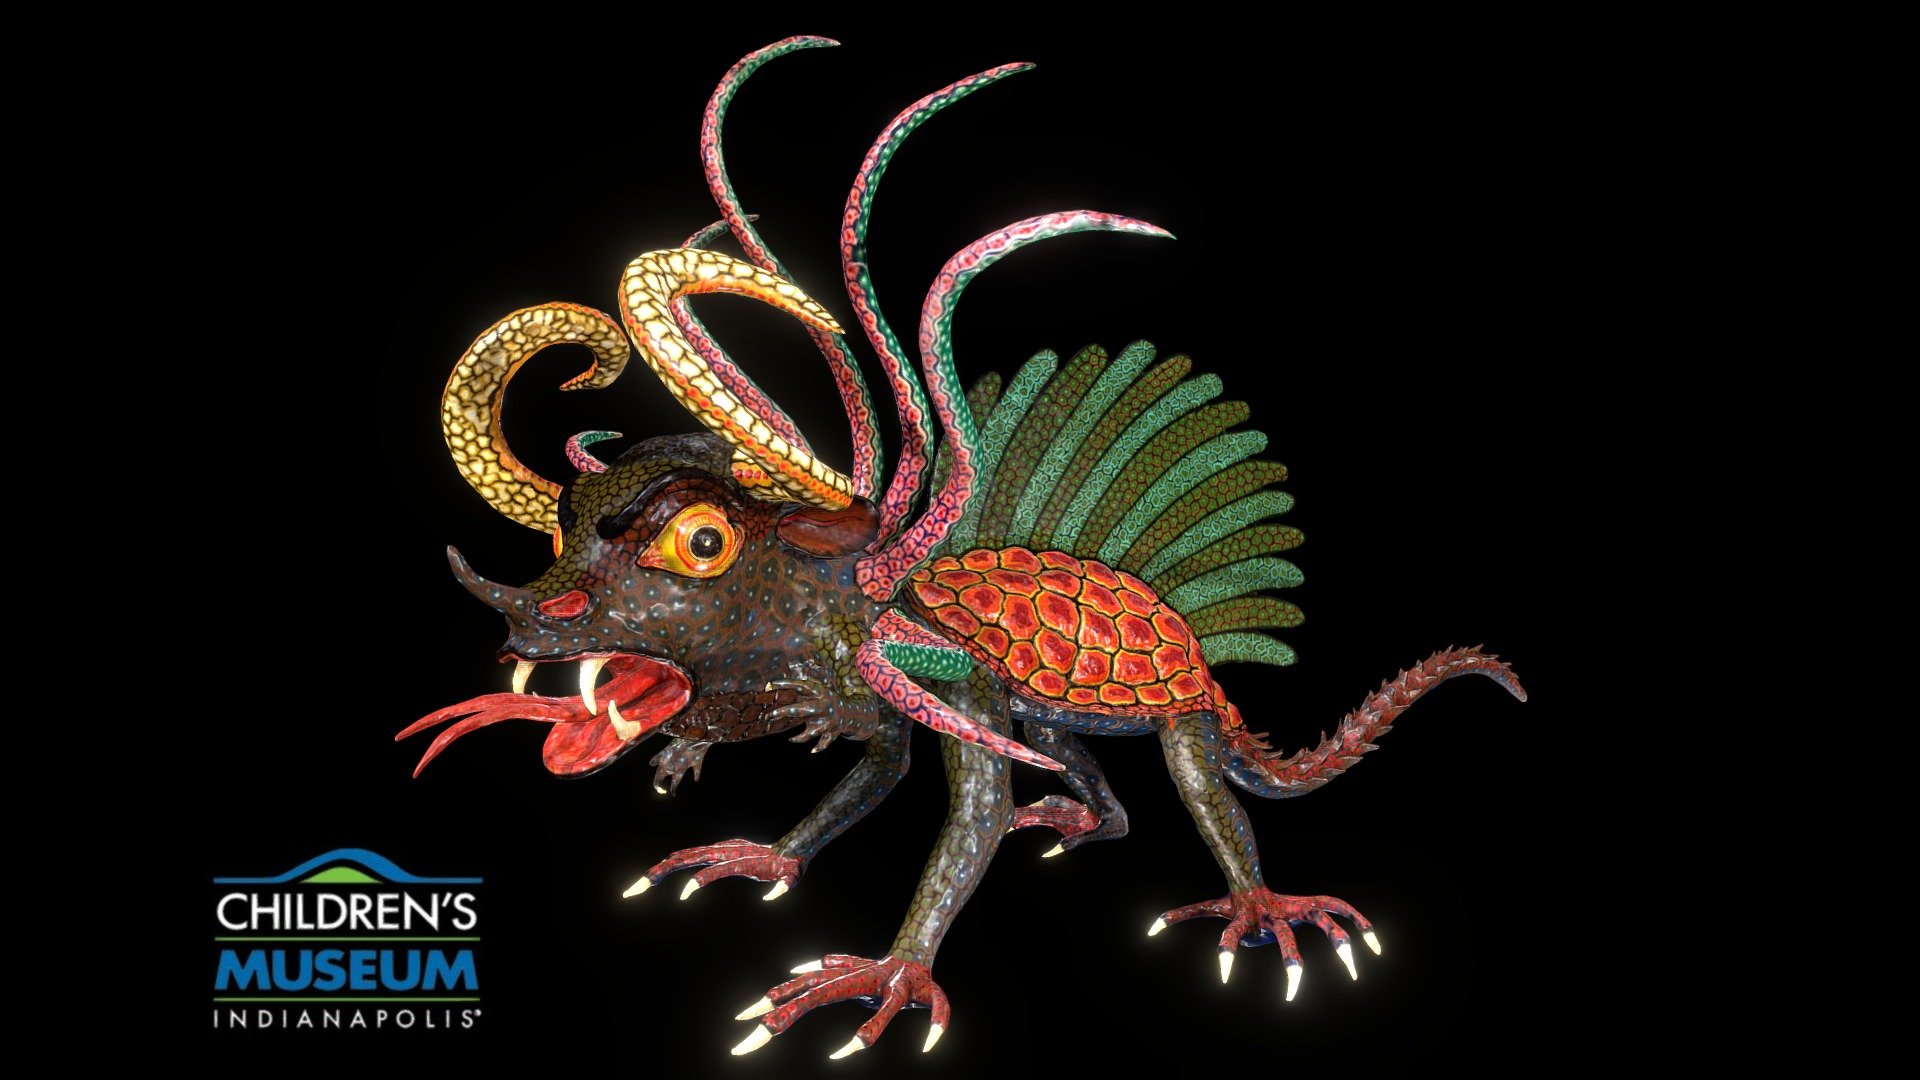 Dragon figure sculpted in paper mache. Painted in vivid color and design.

This artifact belongs to The Children's Museum of Indianapolis.

Everything was 3D scanned with a Creaform Go! SCAN Spark by Connections XR.

This project is in partnership with CICF, and the IUPUI University Library 3d model